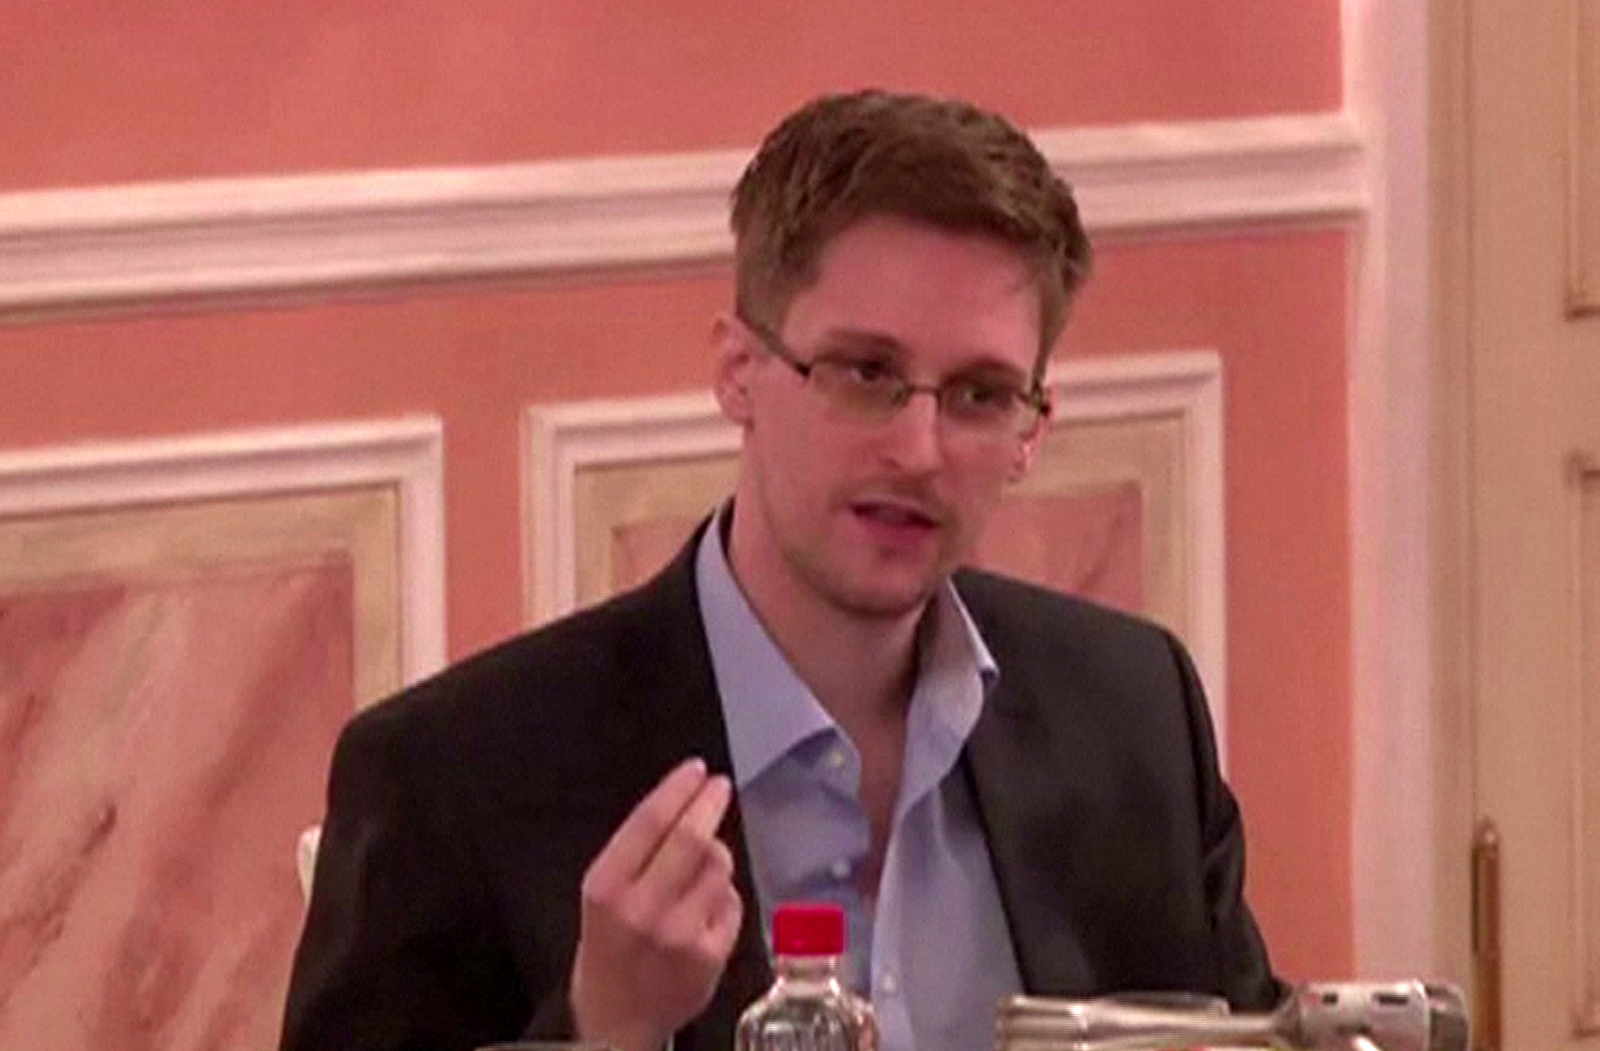 Edward Snowden Joins Twitter And Is Only Following One Account The NSA IBTimes UK